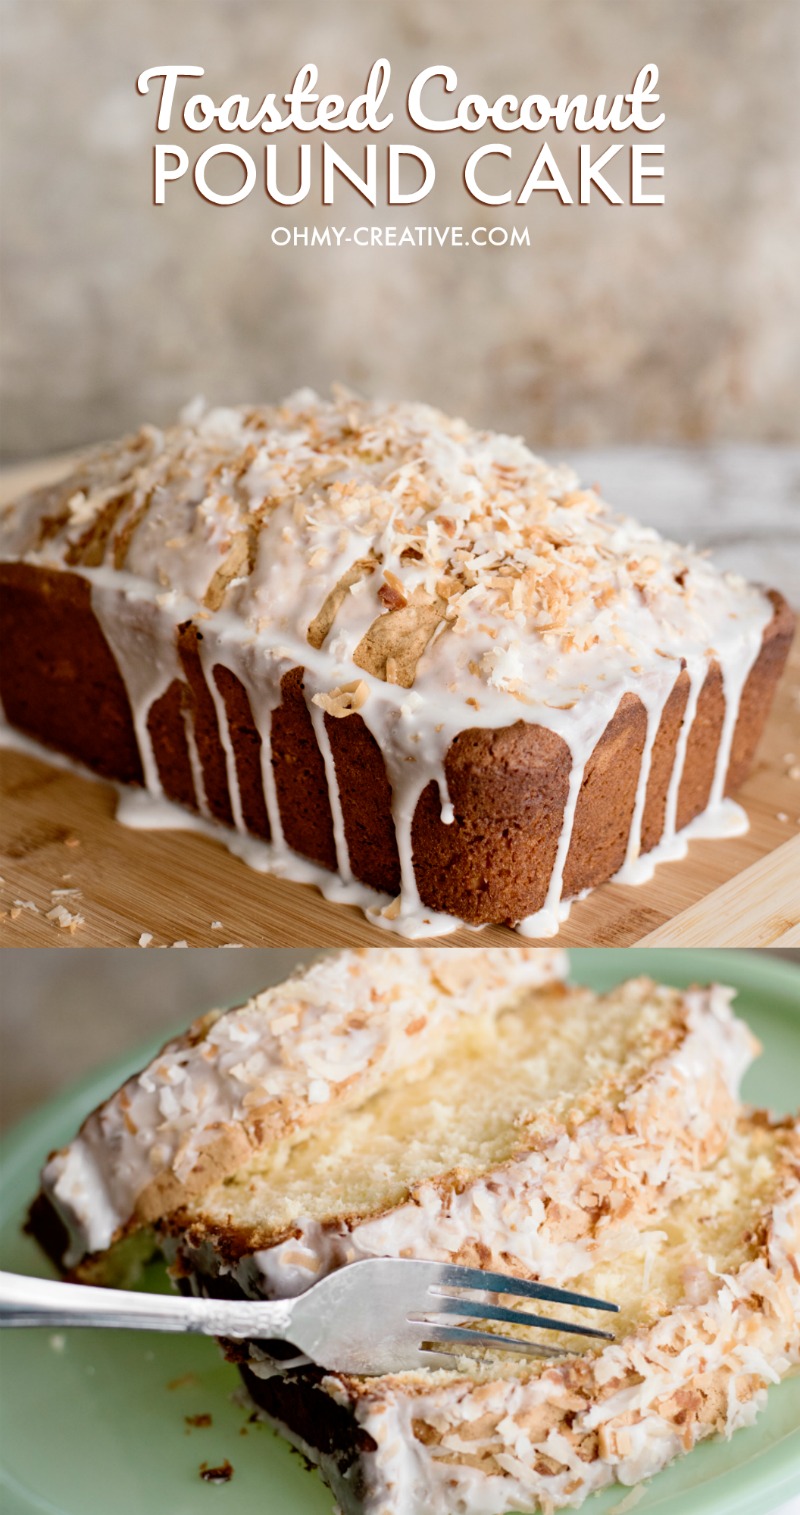 Toasted Coconut Pound Cake Recipe is dripping with a delicious glaze topped with toasted coconut.